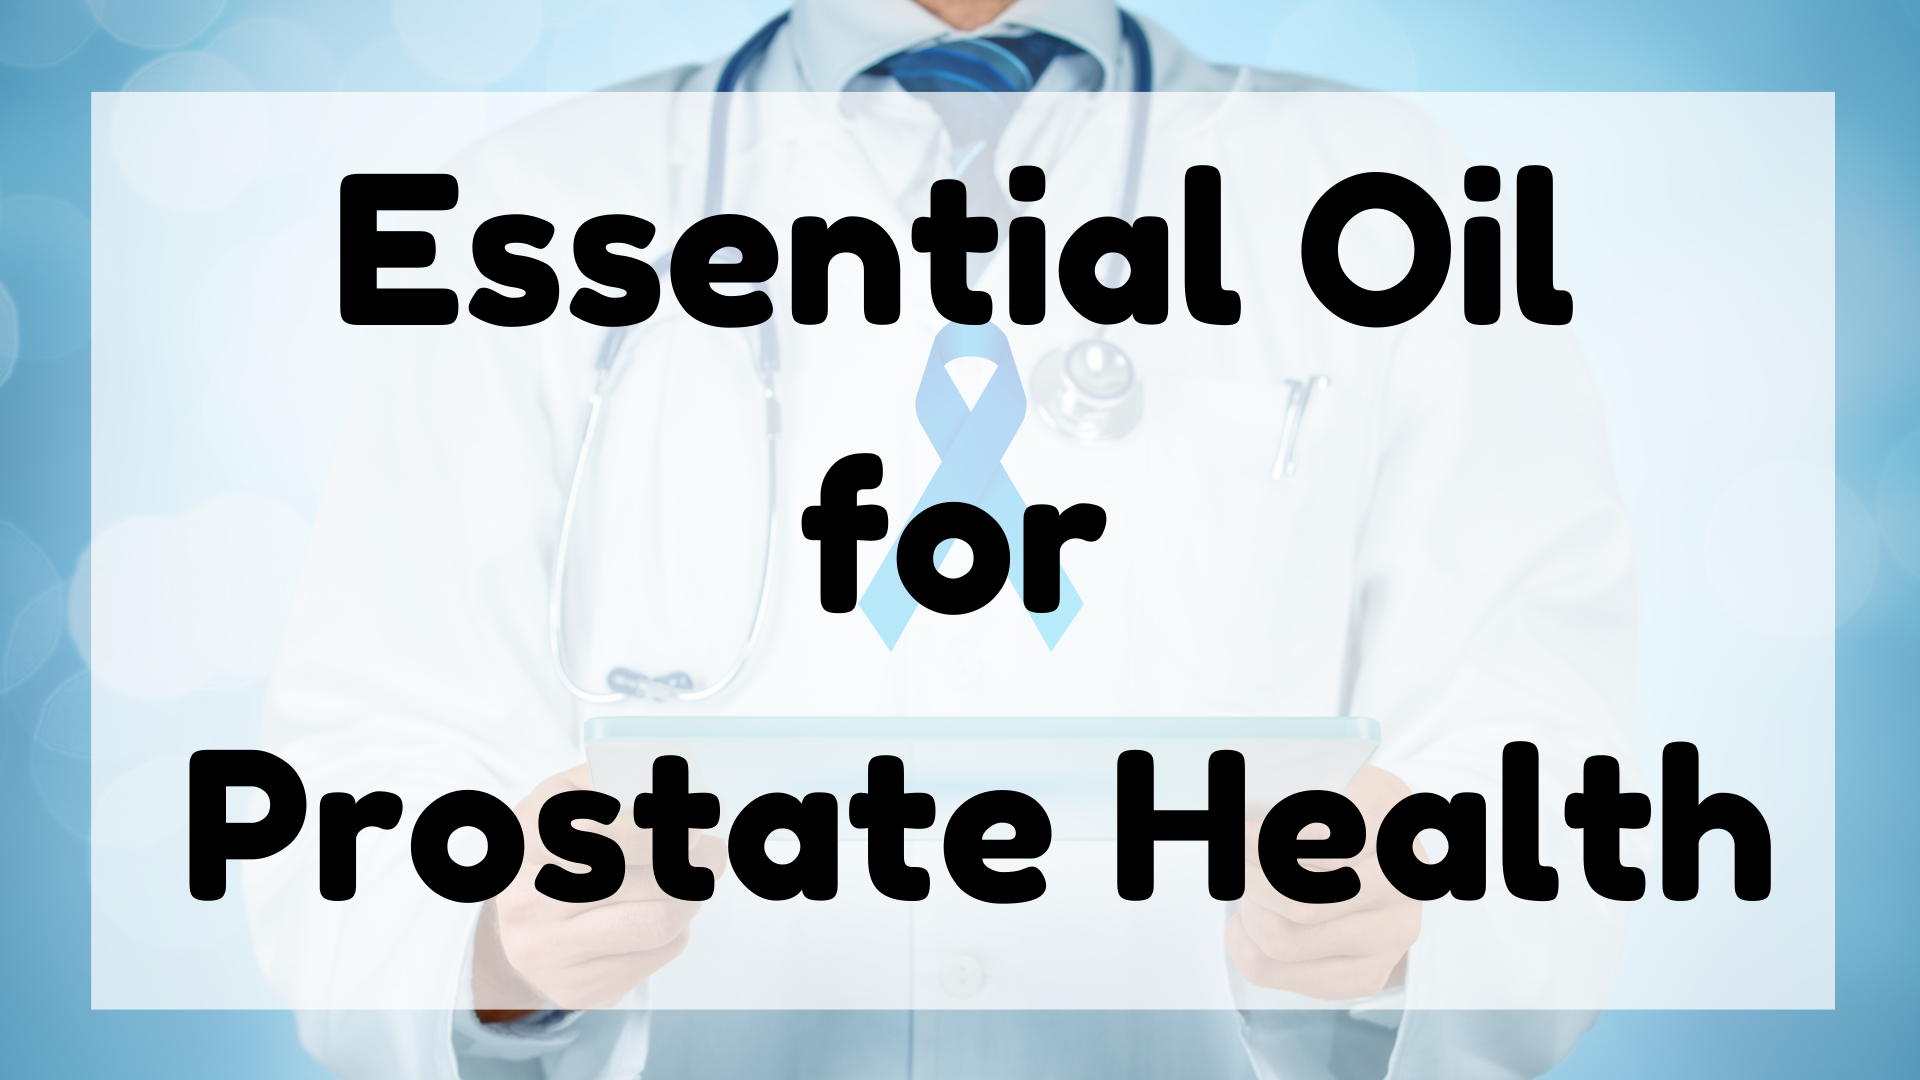 Essential Oil for Prostate Health featured image